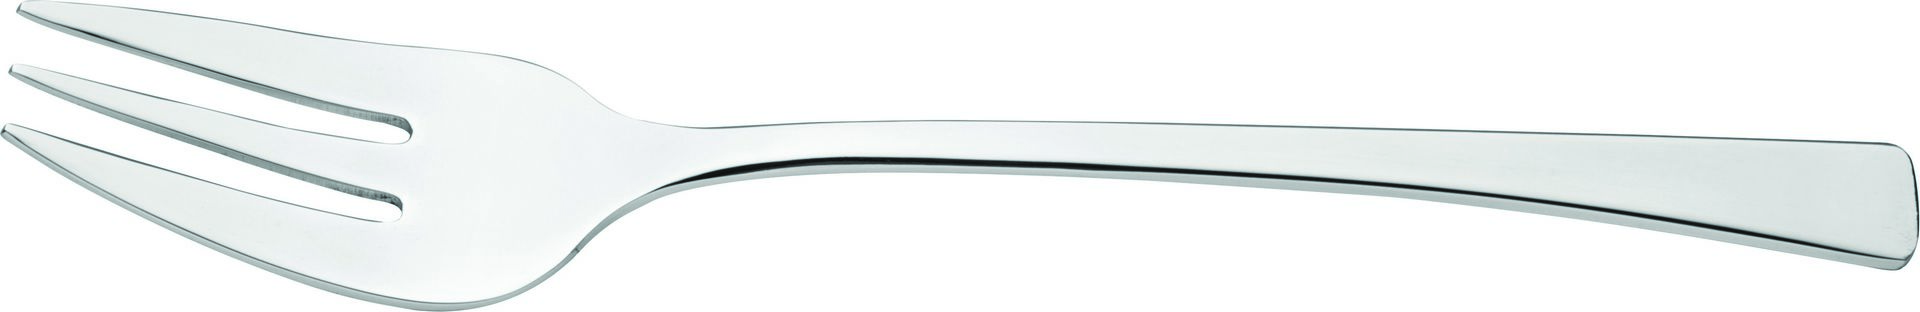 Curve Fish Fork - F38006-000000-B01012 (Pack of 12)